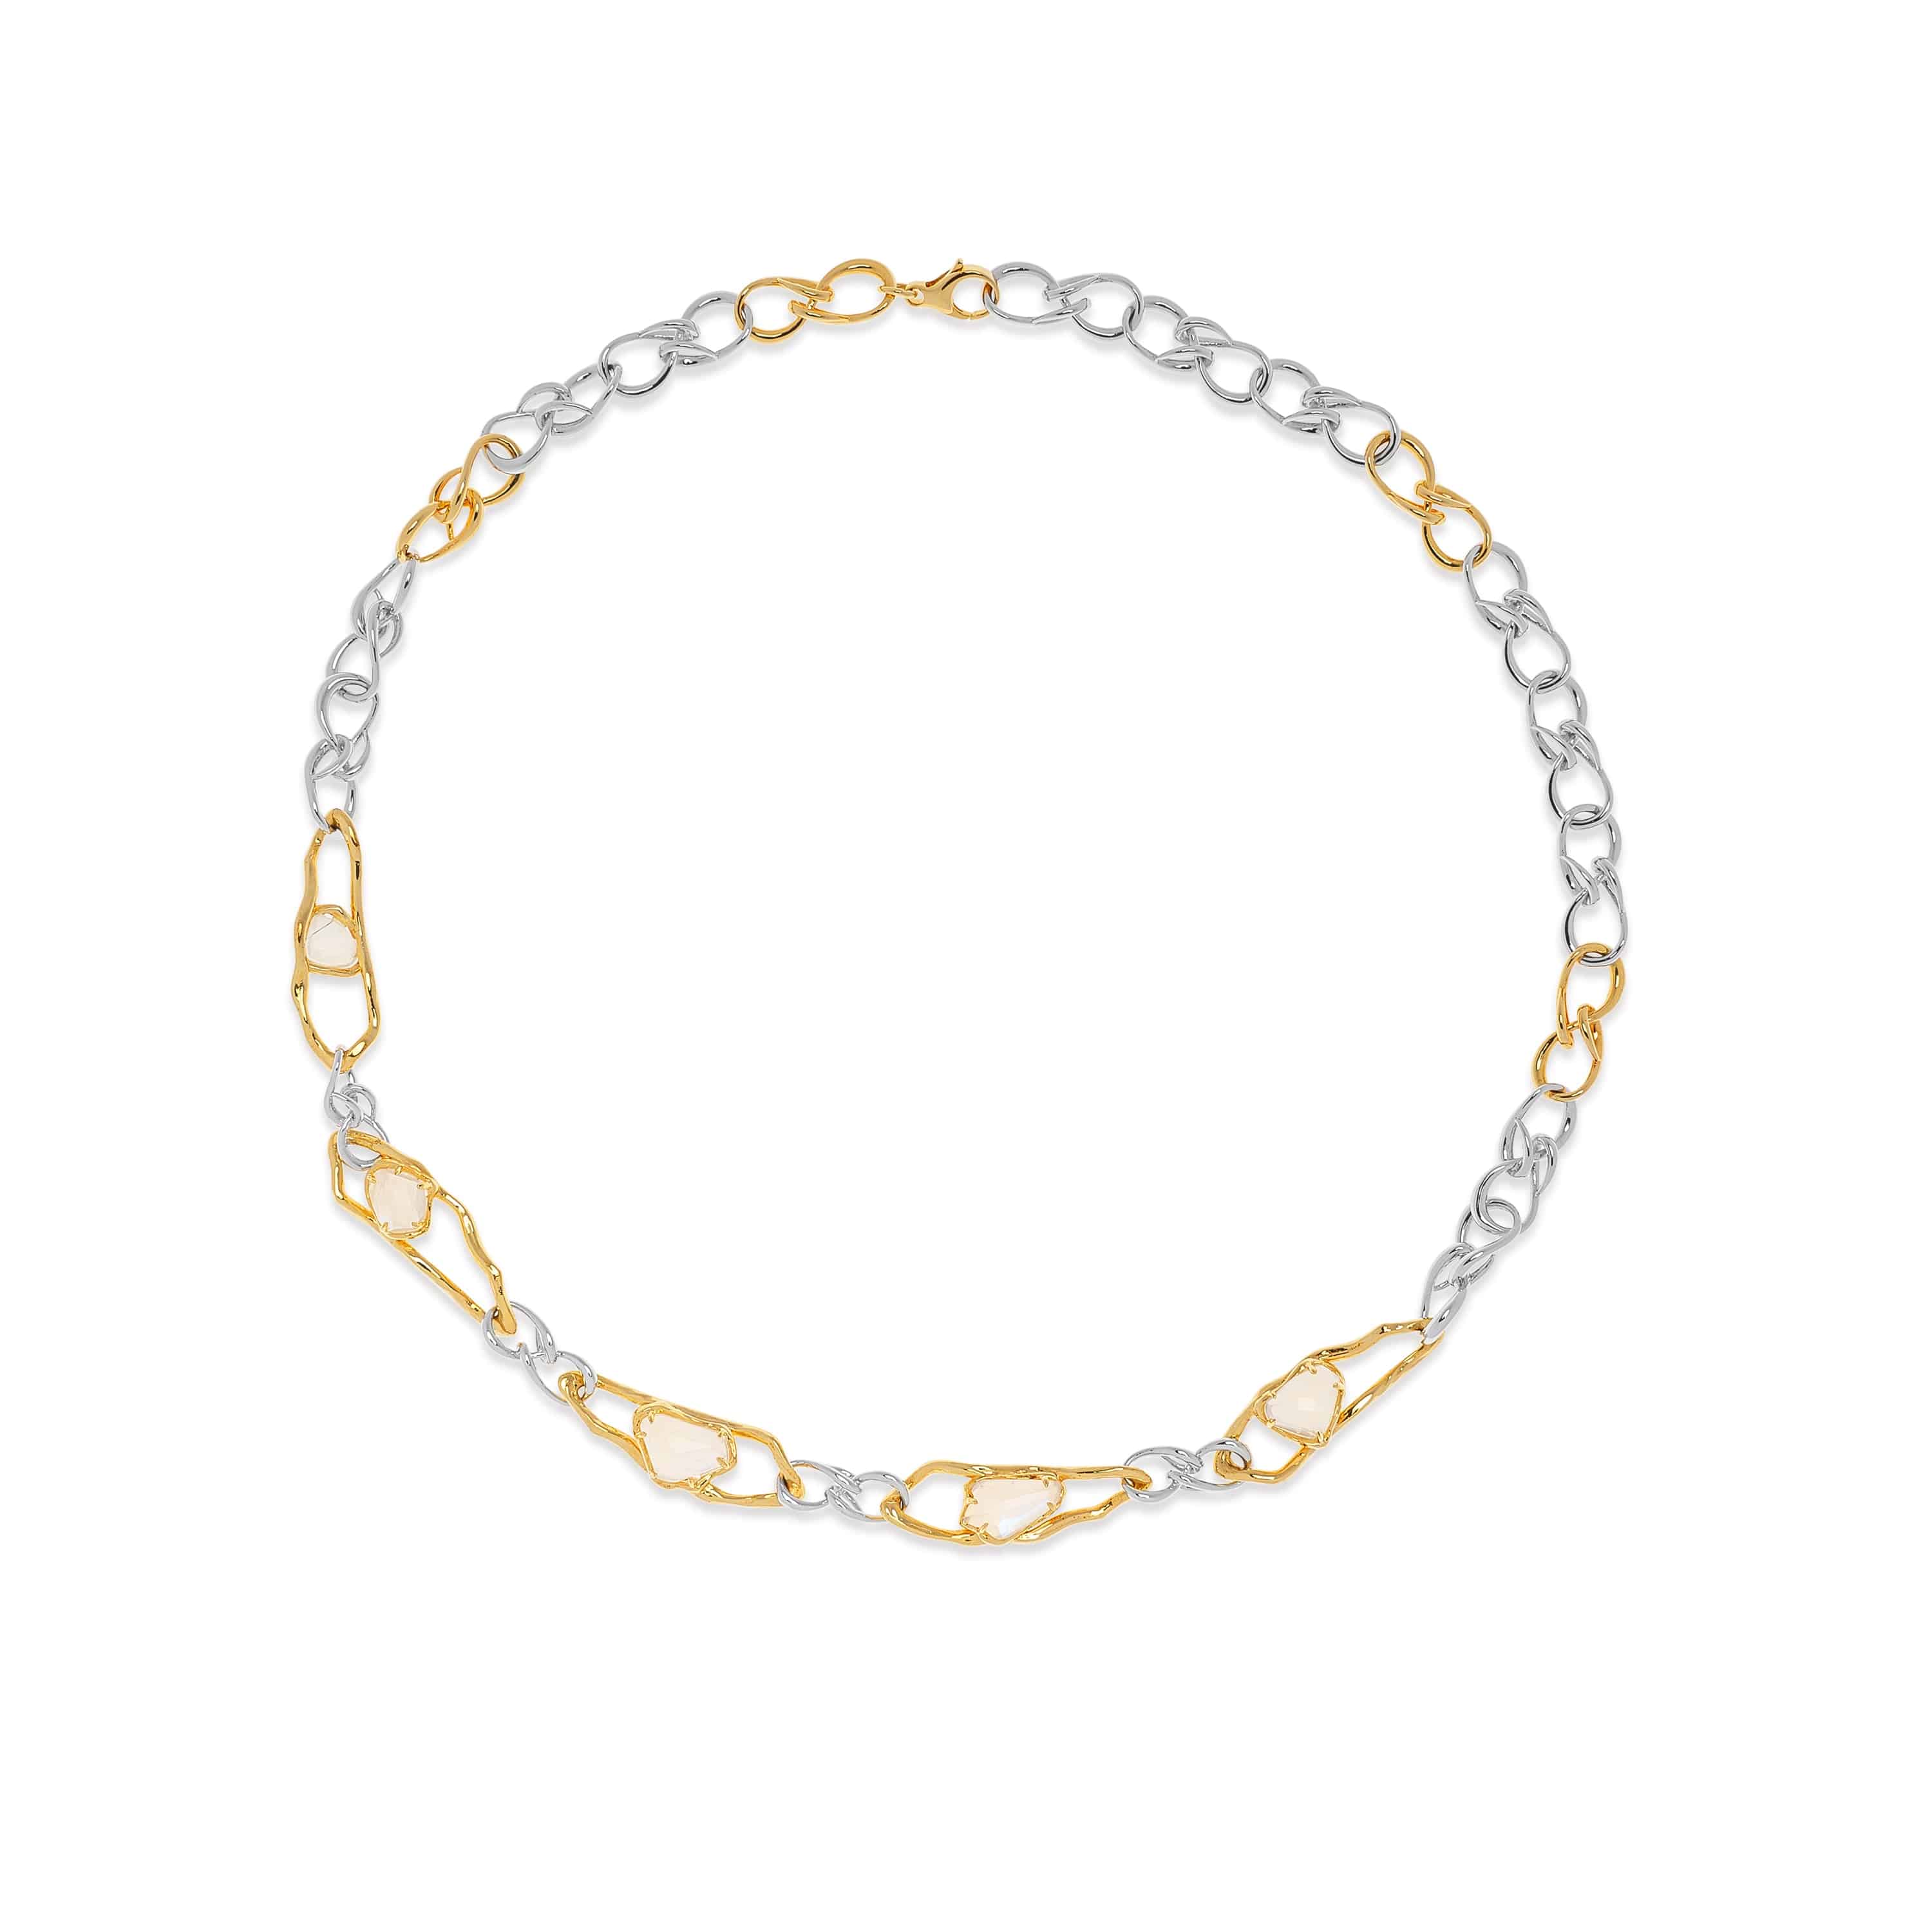 Collar Necklace in Yellow & White Gold With Moonstones